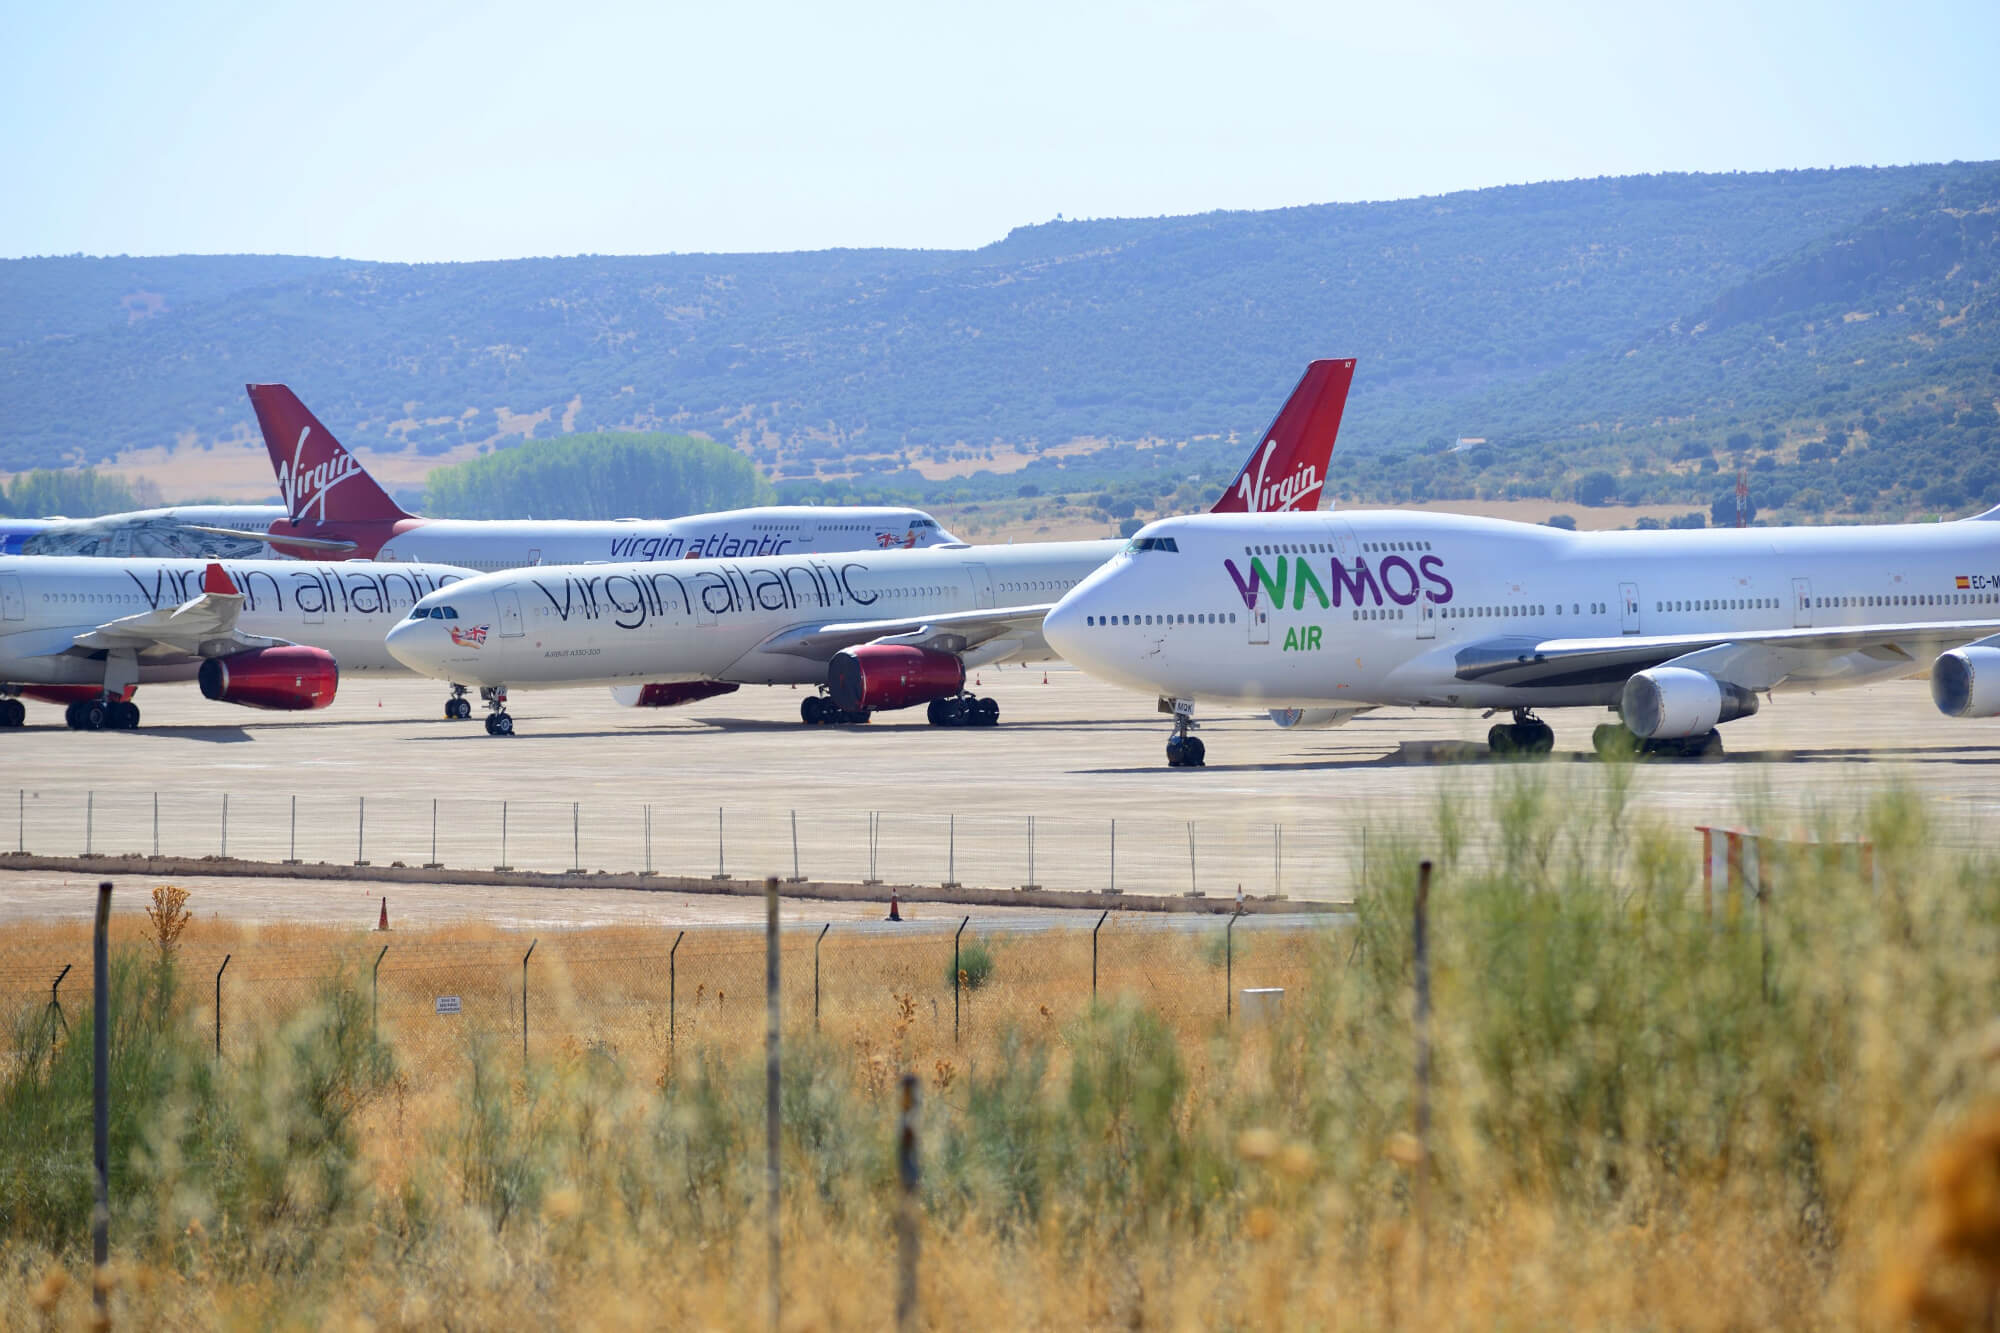 aircraft parked at ciudad real during the pandemic